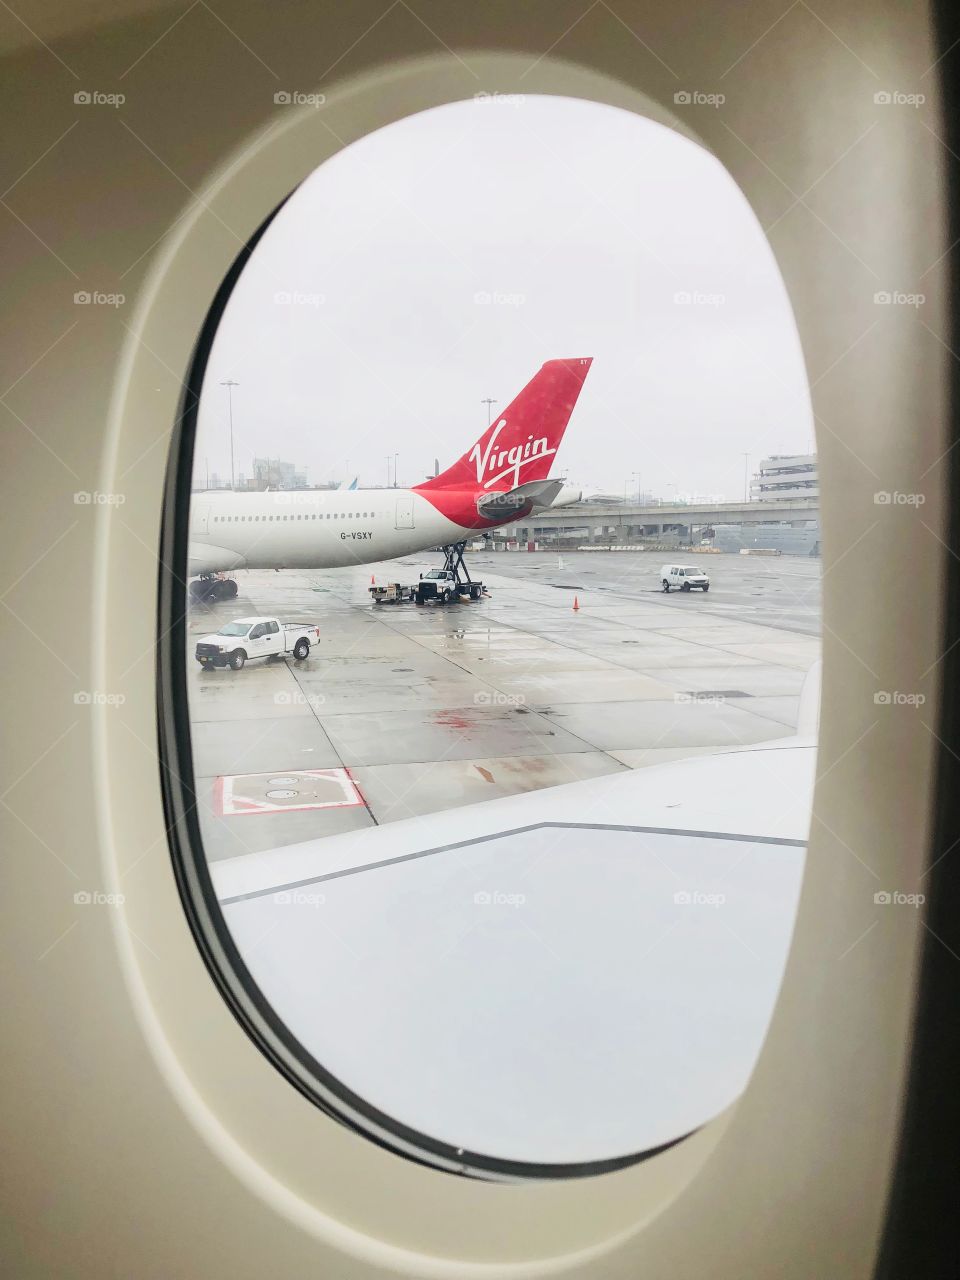 From the glass ! Virgin ! Virgin airline ! Co-plane ! Taken by iPhone X